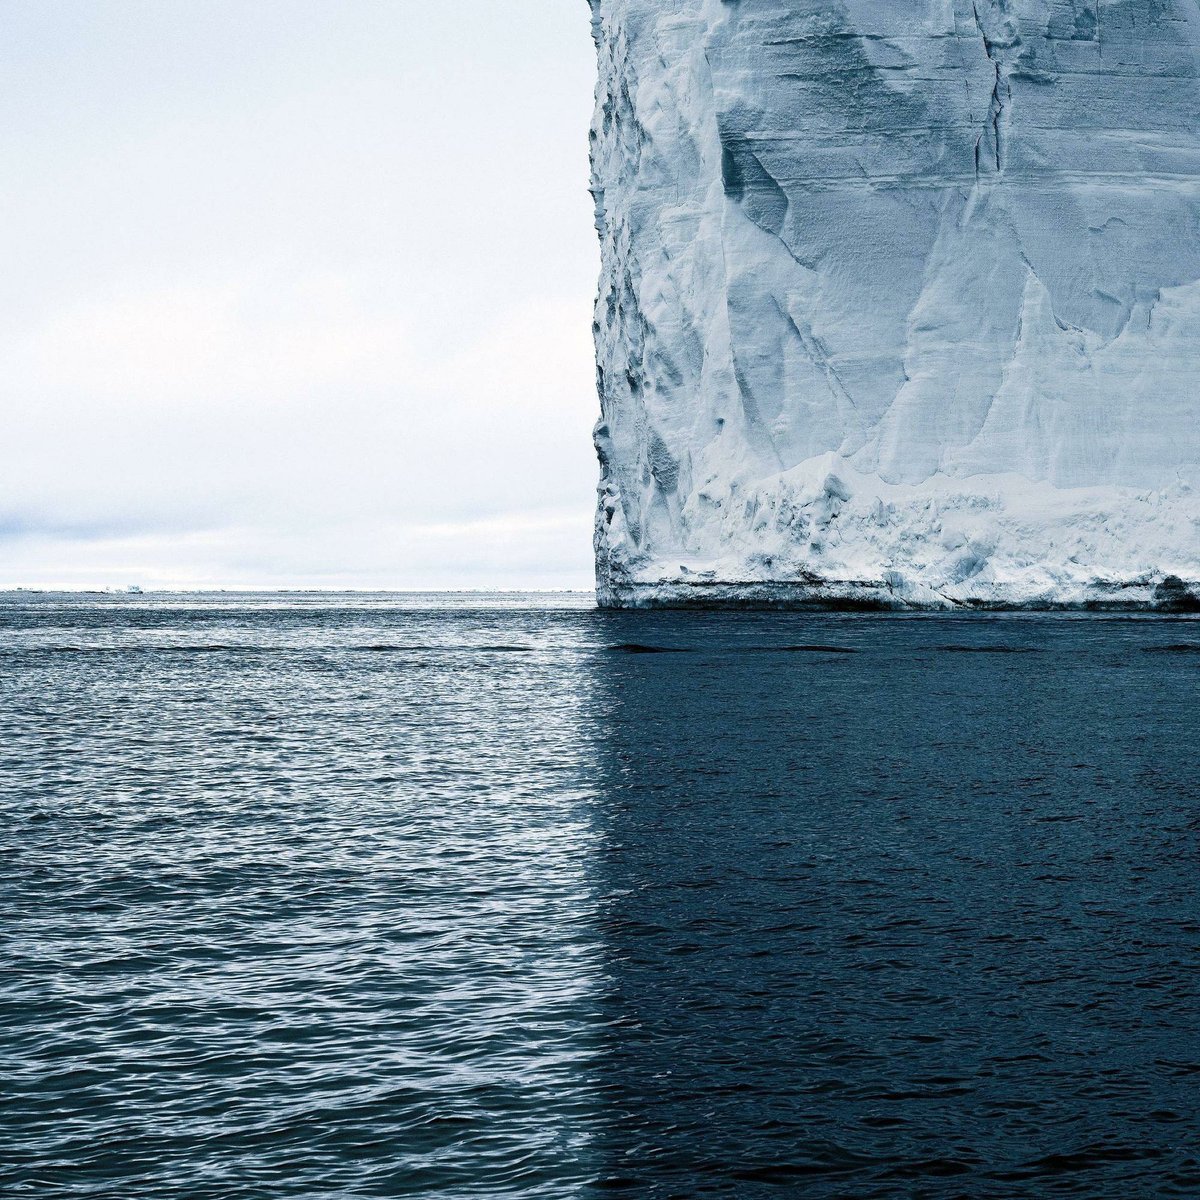 7. Four shades of grey in Antarctica